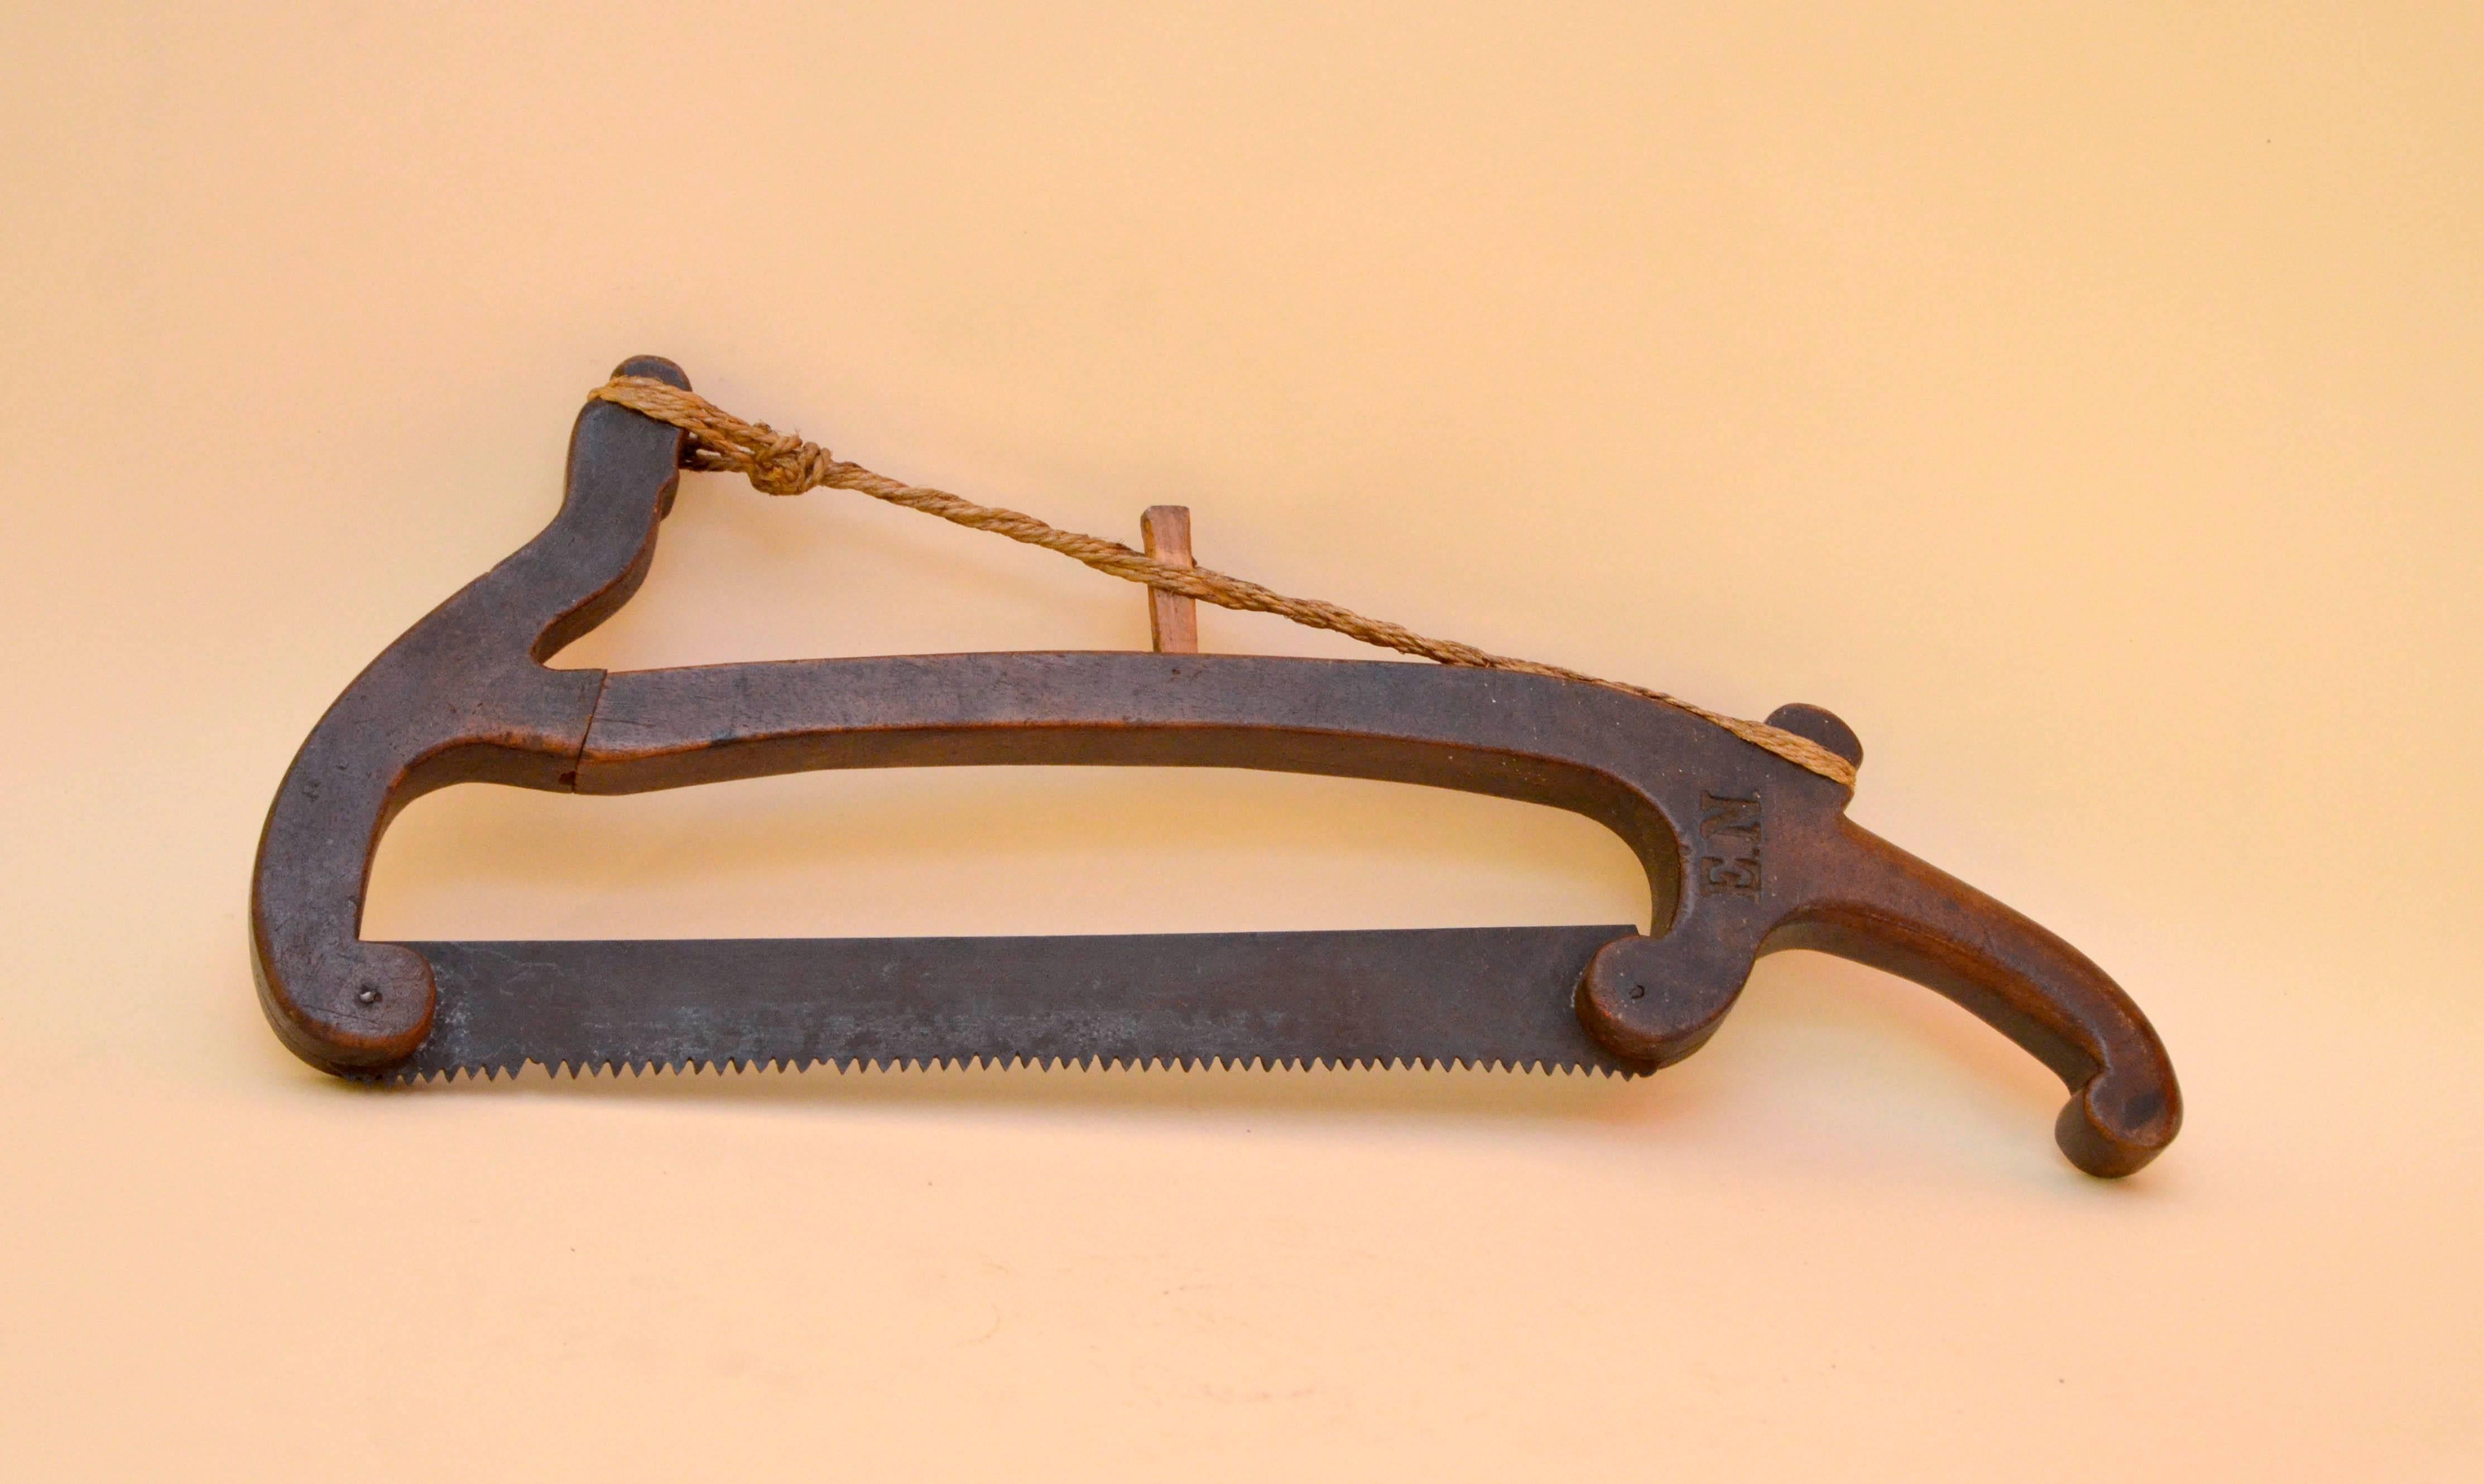 Early '800 very well preserved traditional hacksaw for wine harvest. This exceptional tool with an amazing patina, made in fruitwood, was created in Tuscany, the Italian region famed for its wineries.

It's possible to read on the side of the